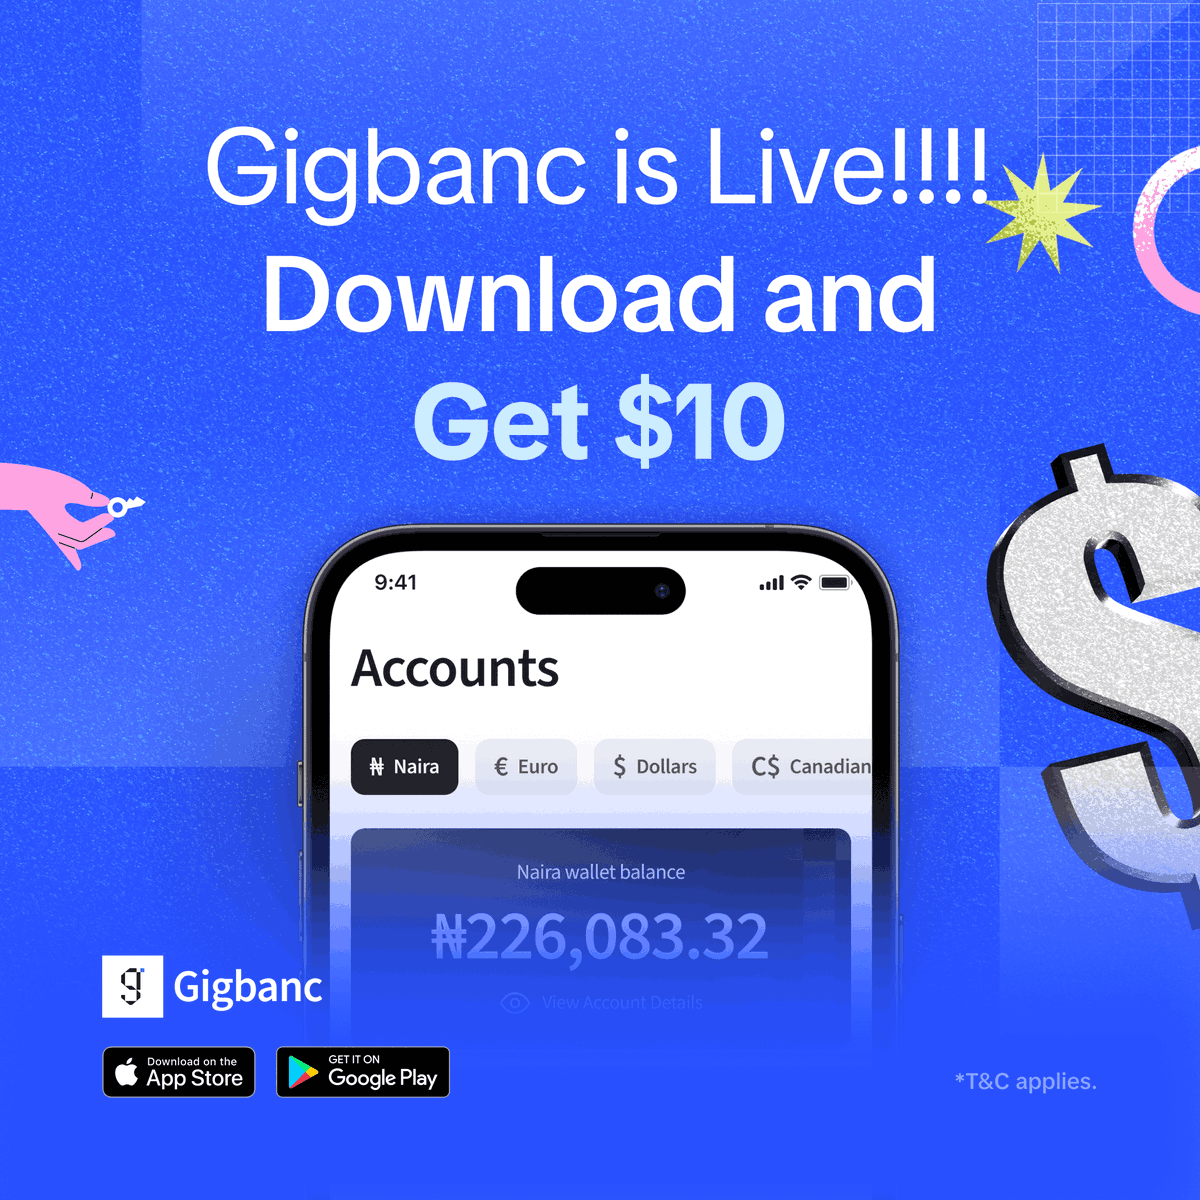 The wait is over!  Gigbanc is officially LIVE!  

We have room for 100 lucky people to win $10 this month, and the rules are simple:
Download Gigbanc 
Sign up 
Leave a review on App or Play store  

And boom! You're eligible to be one of the lucky winners.